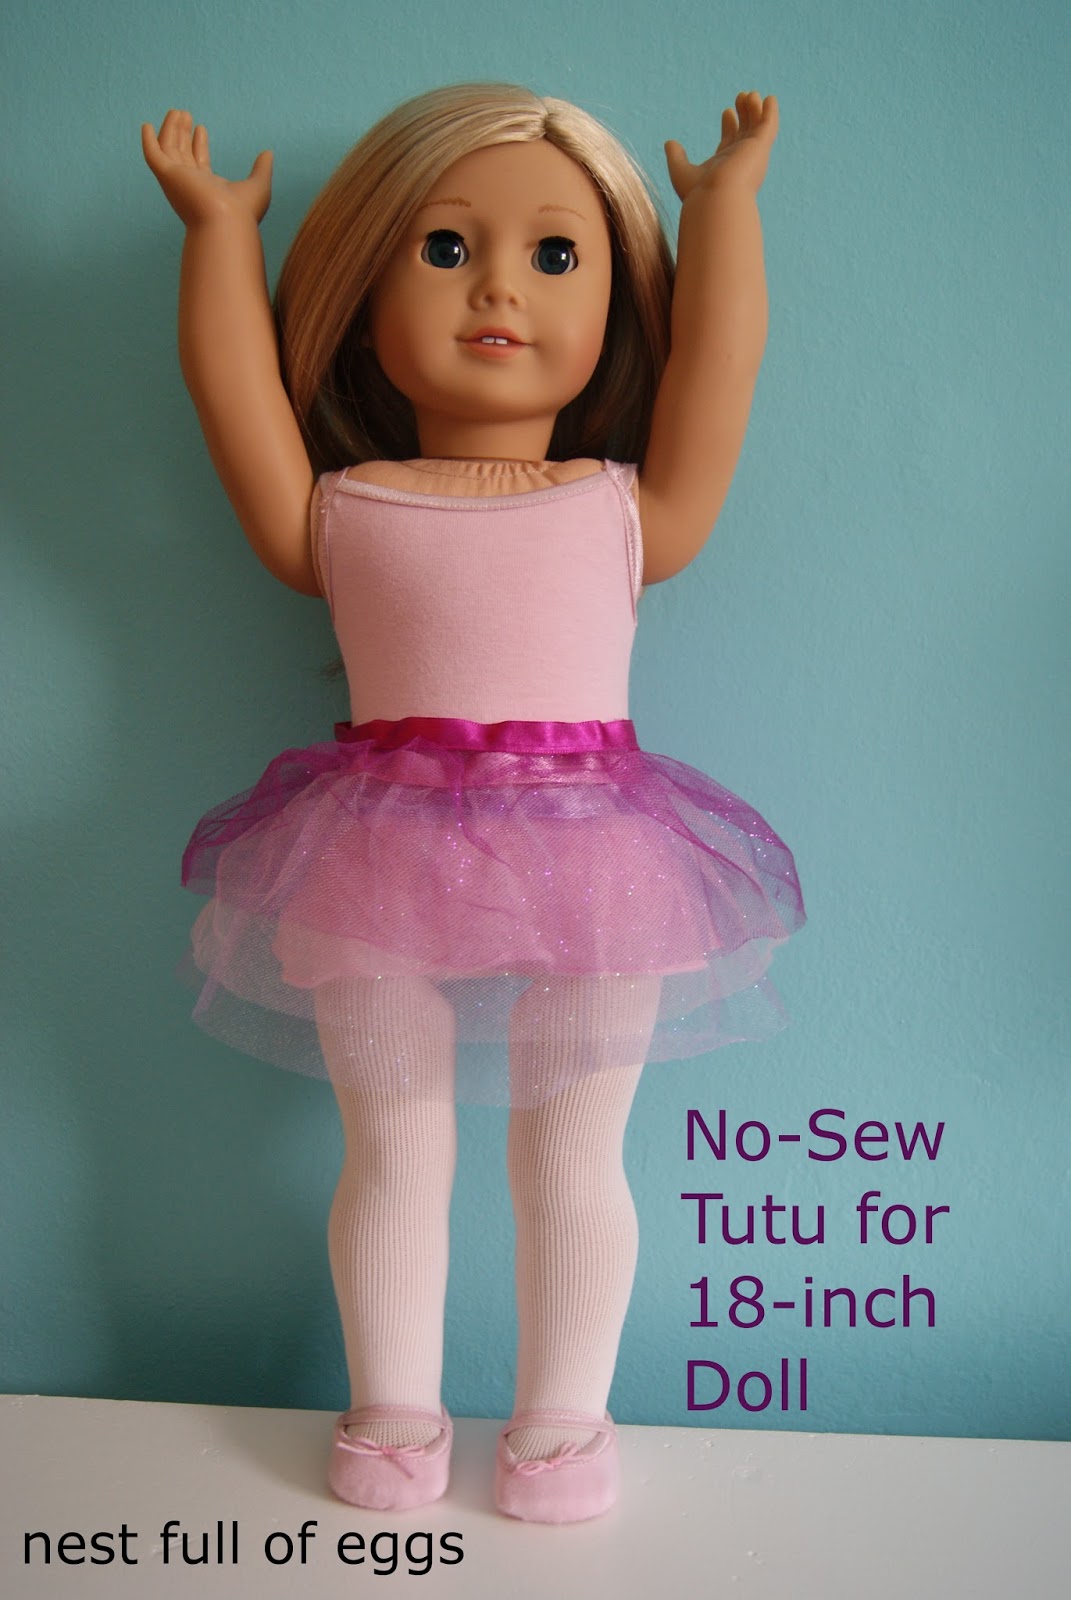 No-sew tutu for 18-inch doll by nest full of eggs